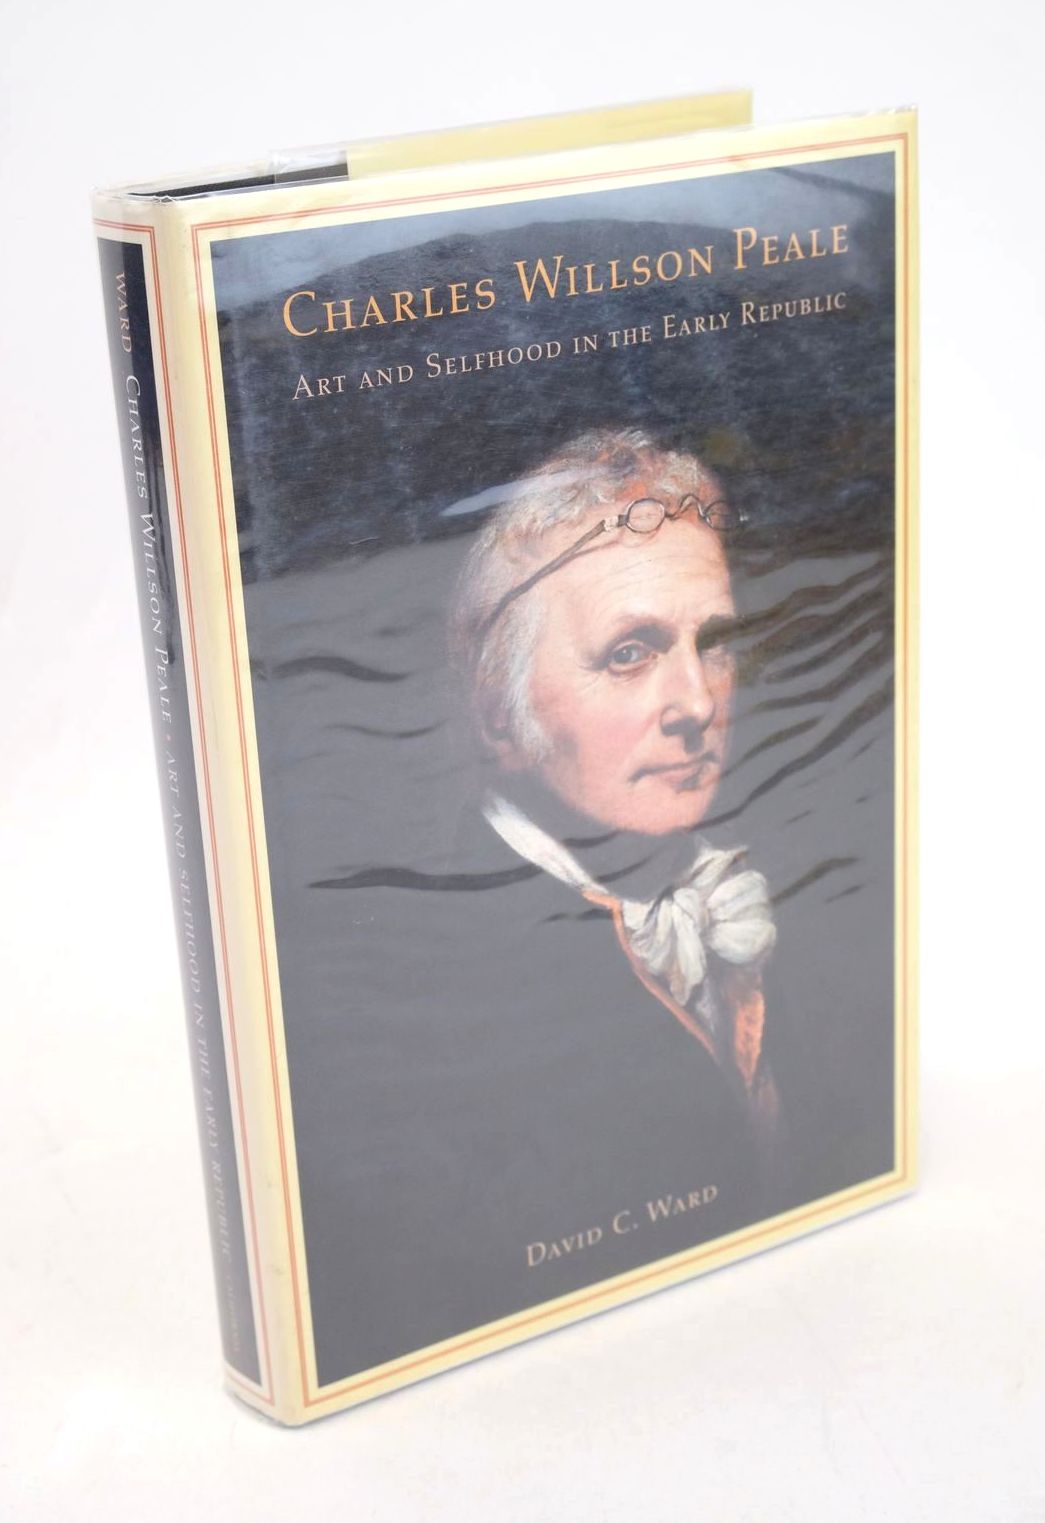 Photo of CHARLES WILLSON PEALE ART AND SELFHOOD IN THE EARLY REPUBLIC written by Ward, David C. illustrated by Peale, Charles Willson published by University of California Press (STOCK CODE: 1327574)  for sale by Stella & Rose's Books